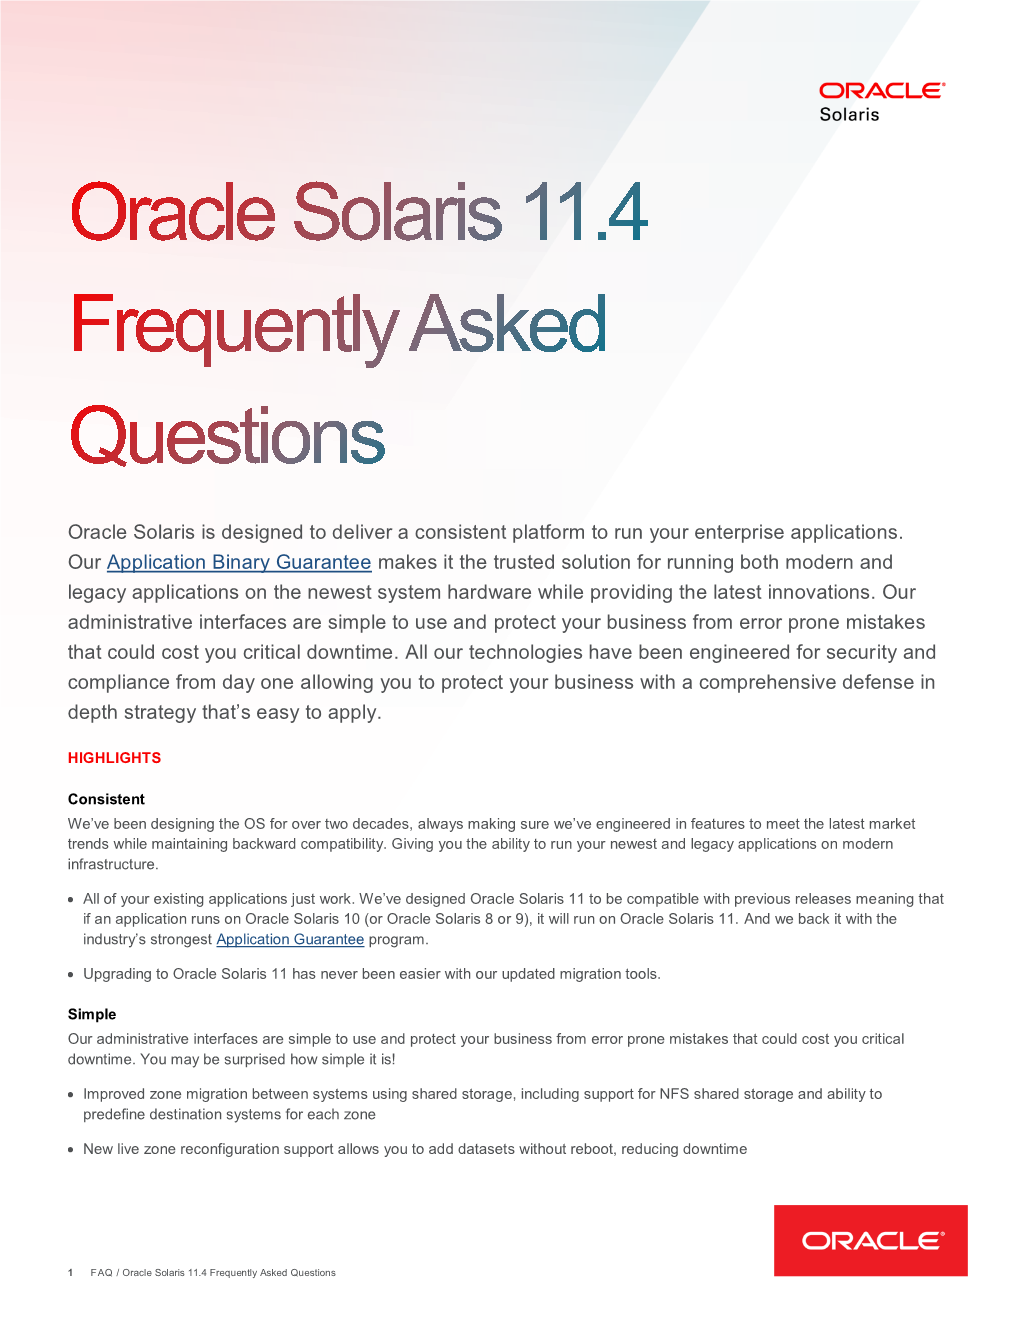 Oracle Solaris 11.4 Frequently Asked Questions